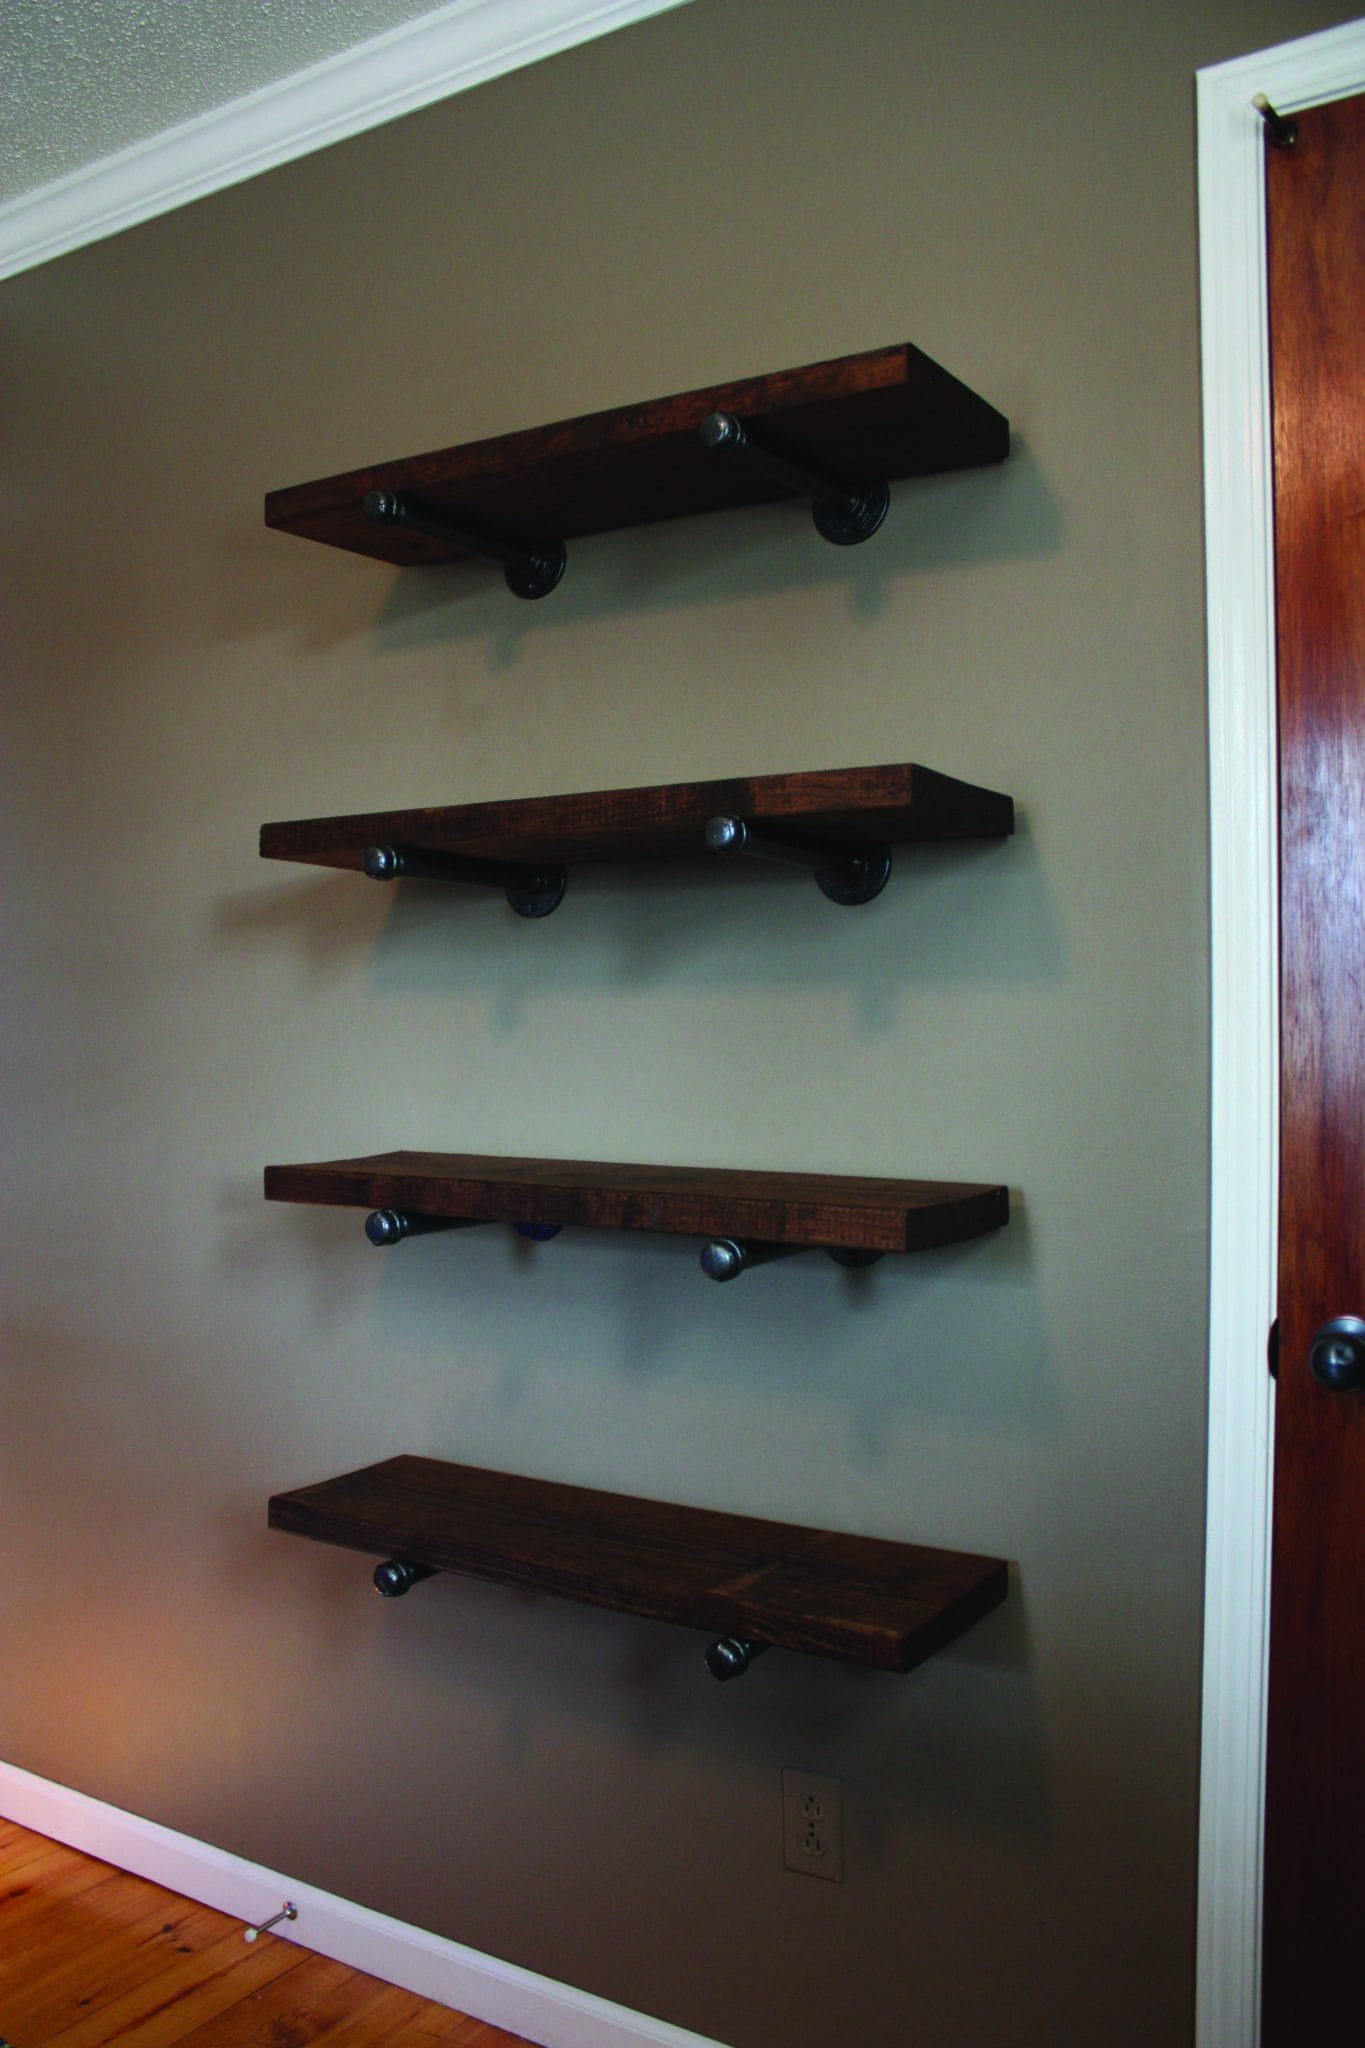 Pipe Bracket Shelving Extreme How To, Shelves Made Out Of Pipe And Wood